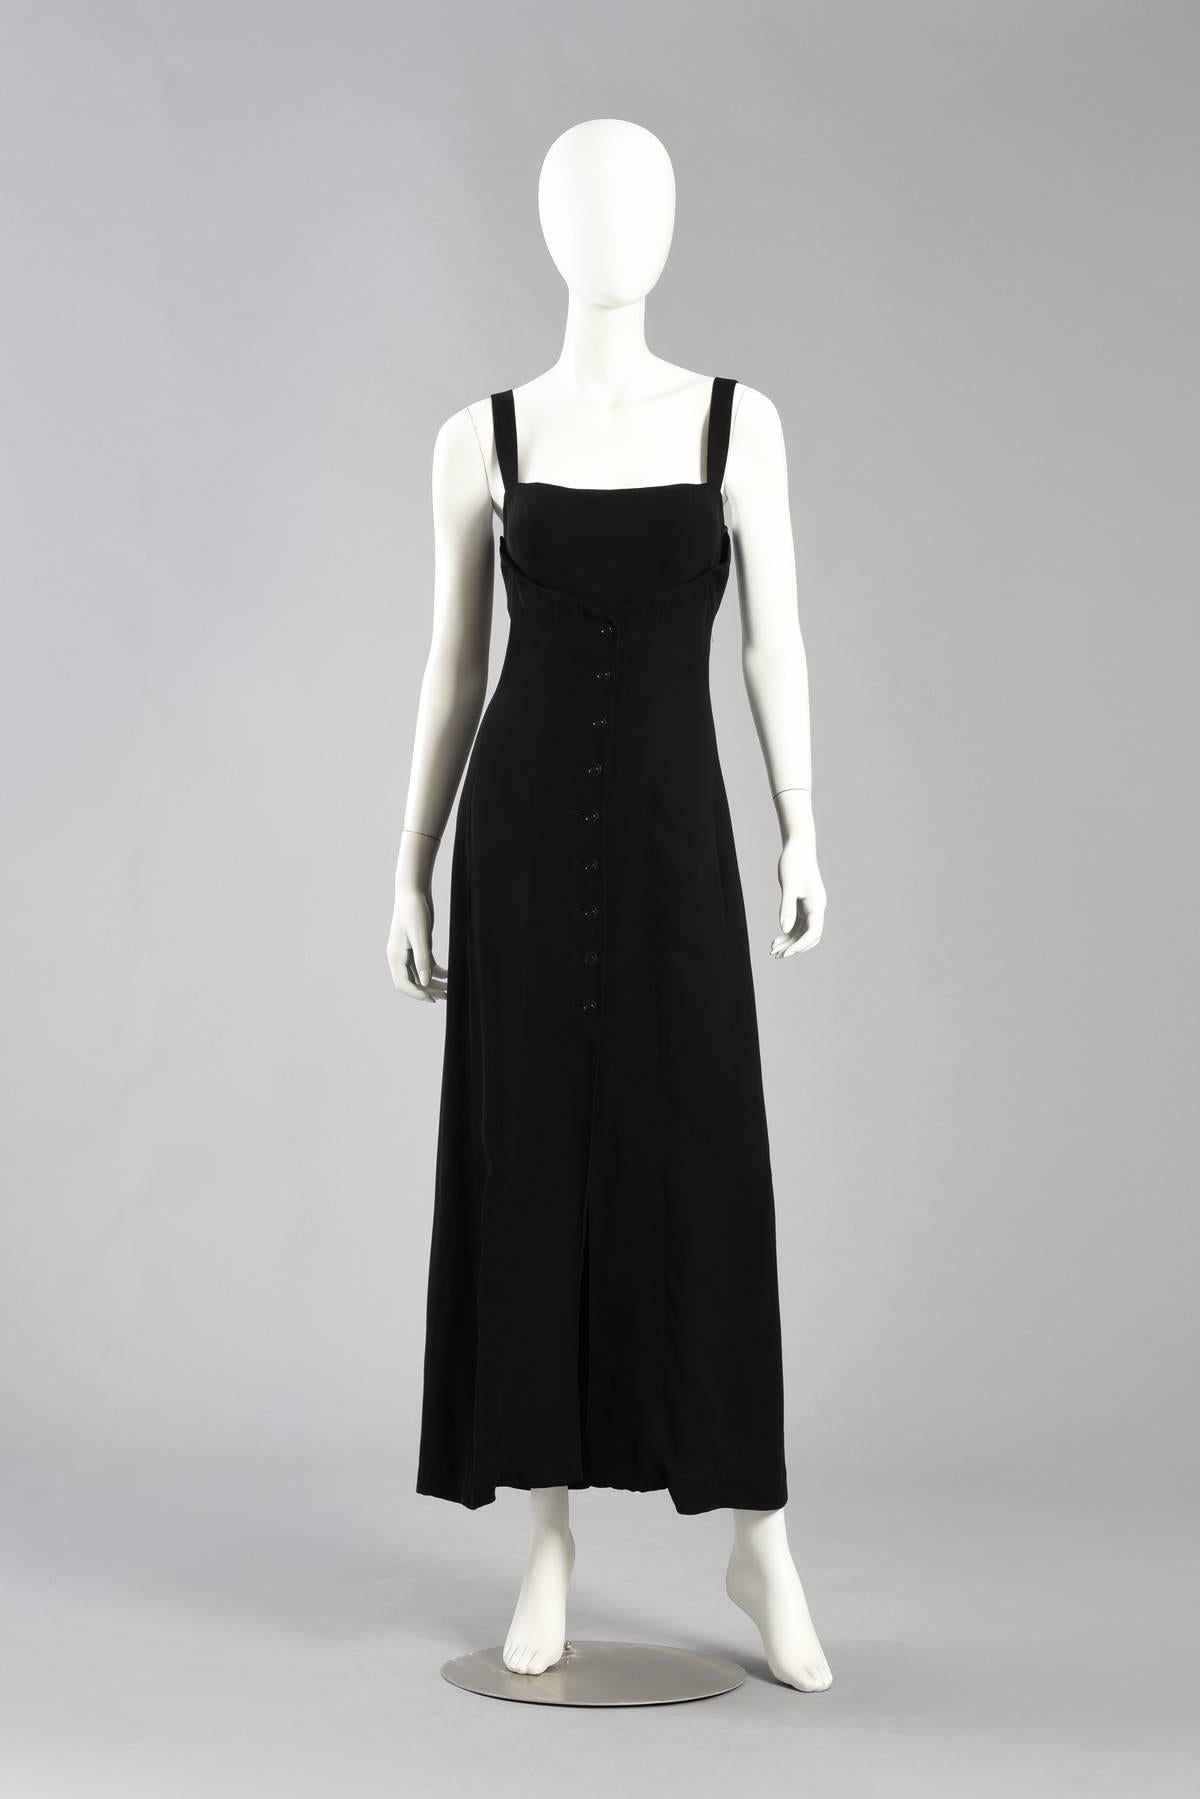 Excellent 1990s Karl Lagerfeld evening dress with shelf bust. Super sleek on right on trend for 2016! Super fitted black rayon body with button front and incredibly sexy shelf bust.  Made from slinky viscose rayon. Fully lined in silk. Excellent